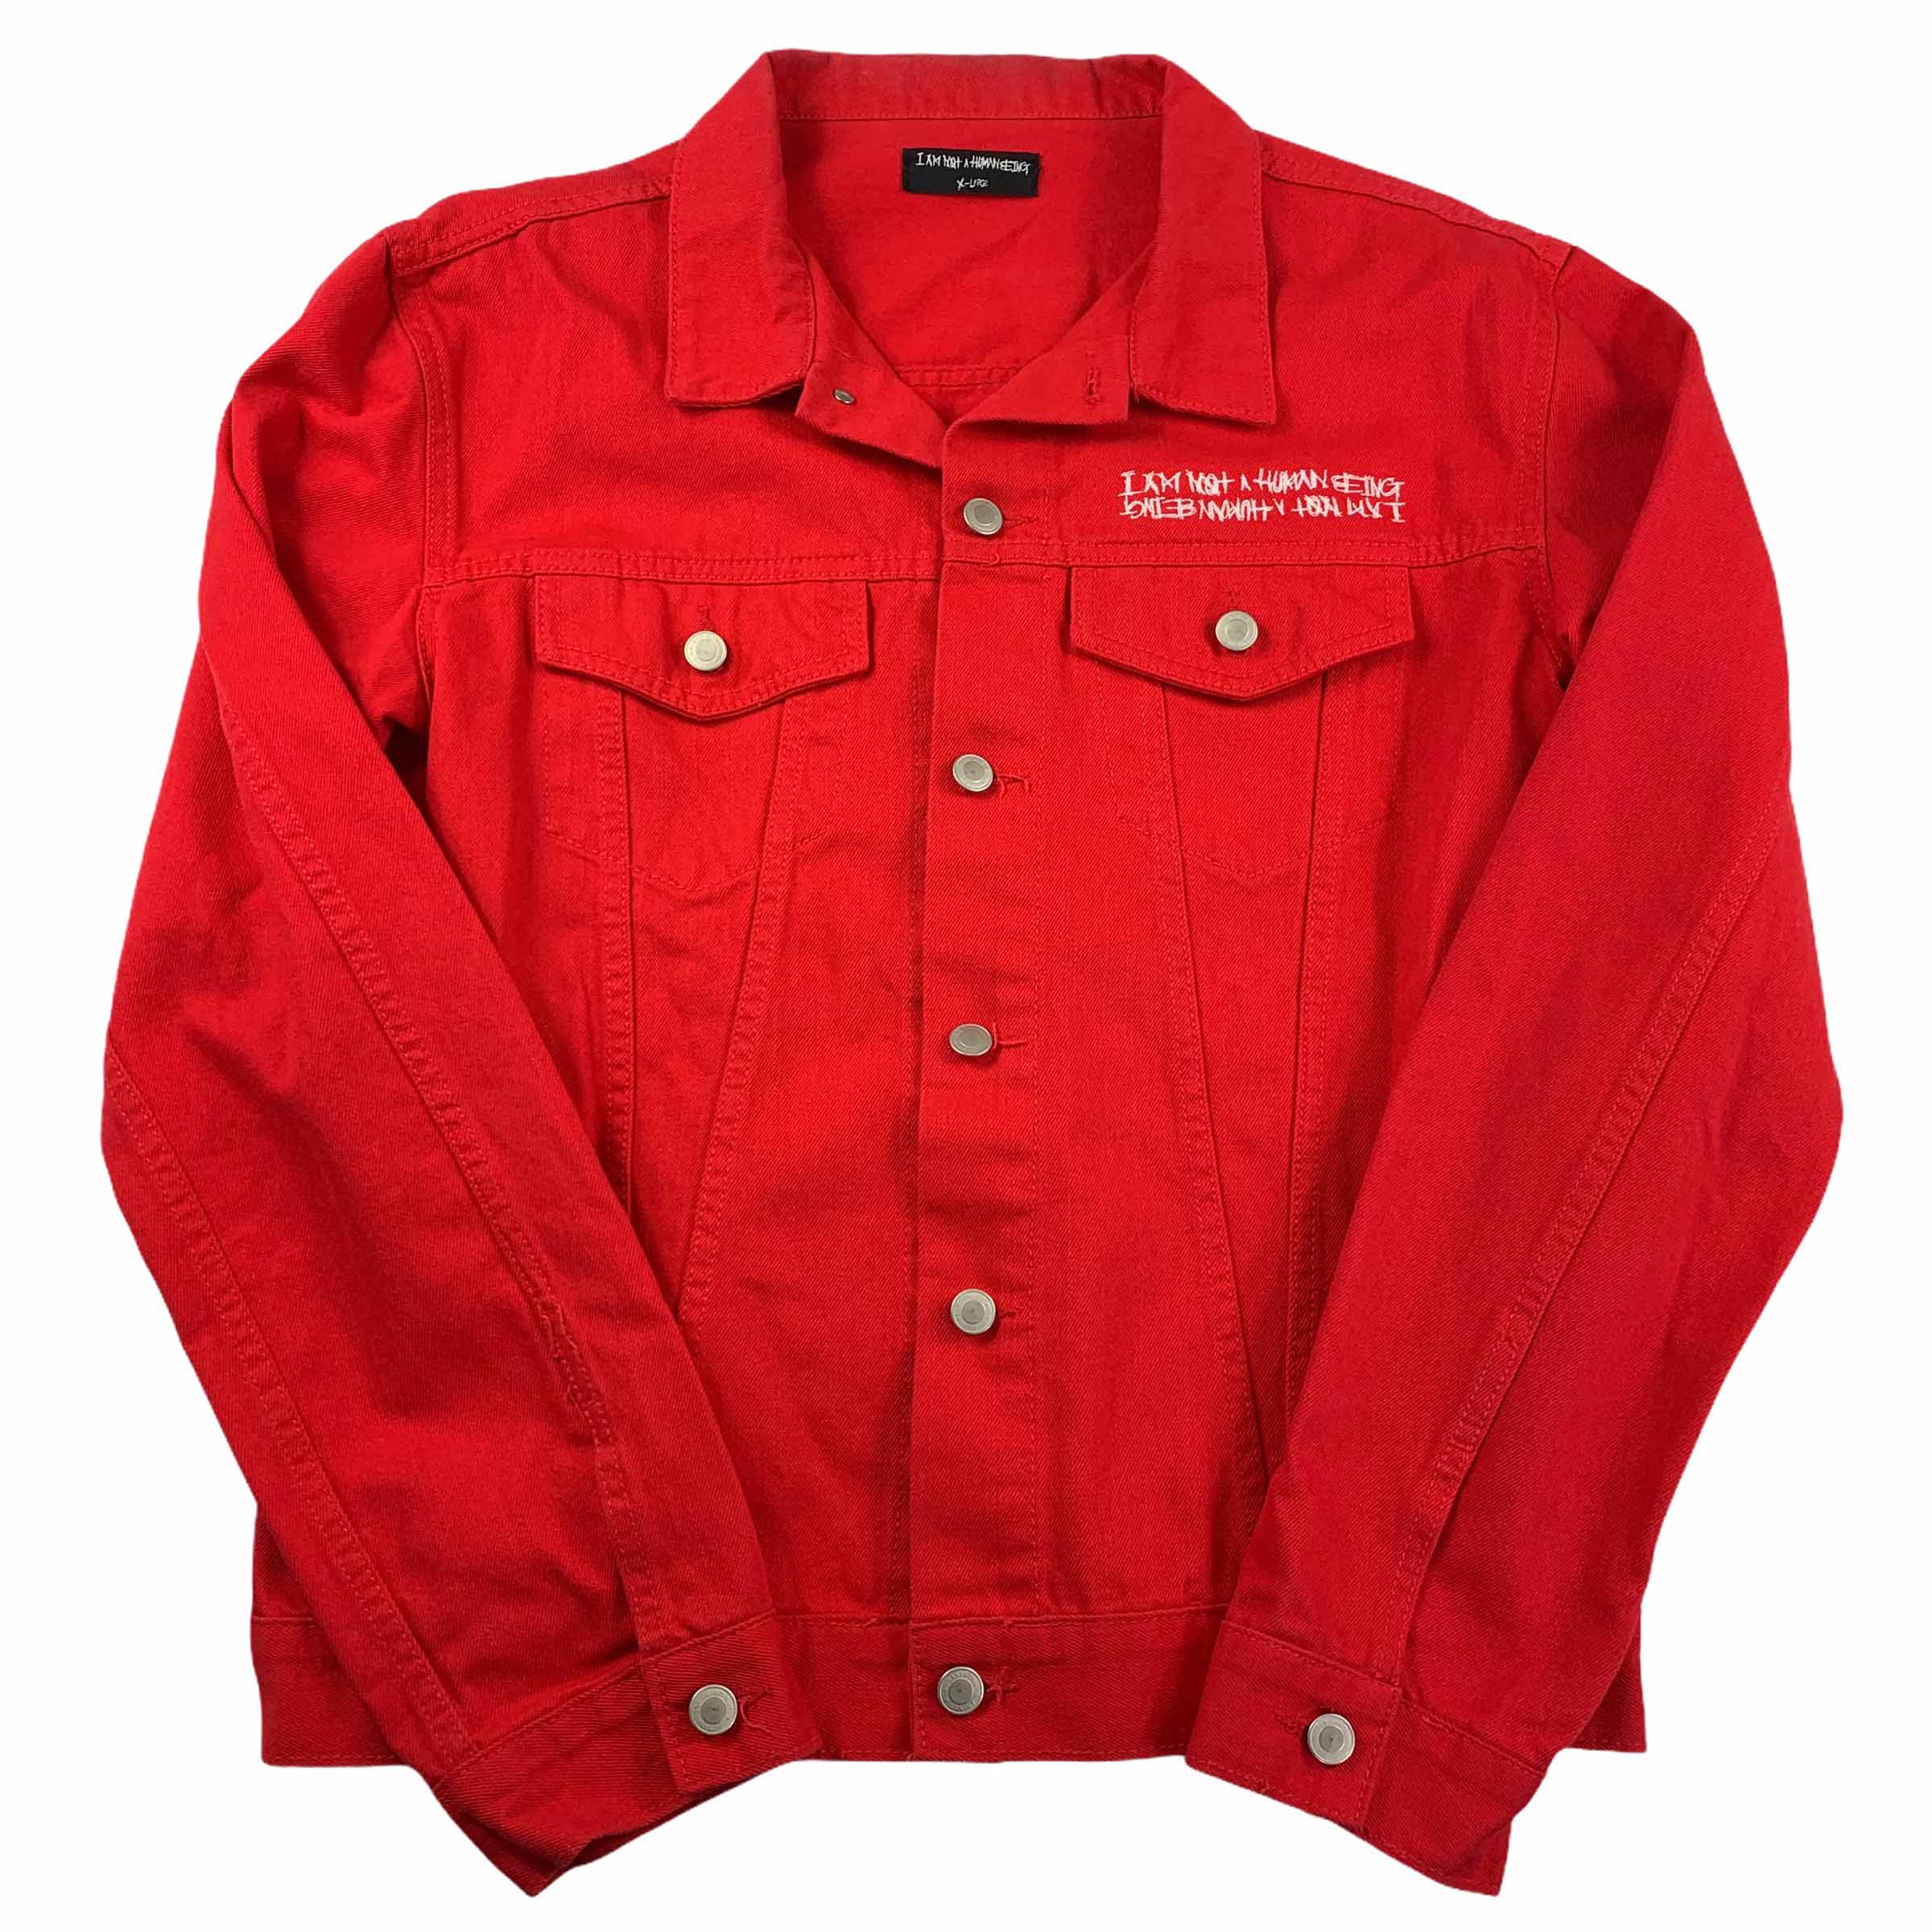 [I AM NOT A HUMAN BEING] Trucker Jacket RED - Size XL